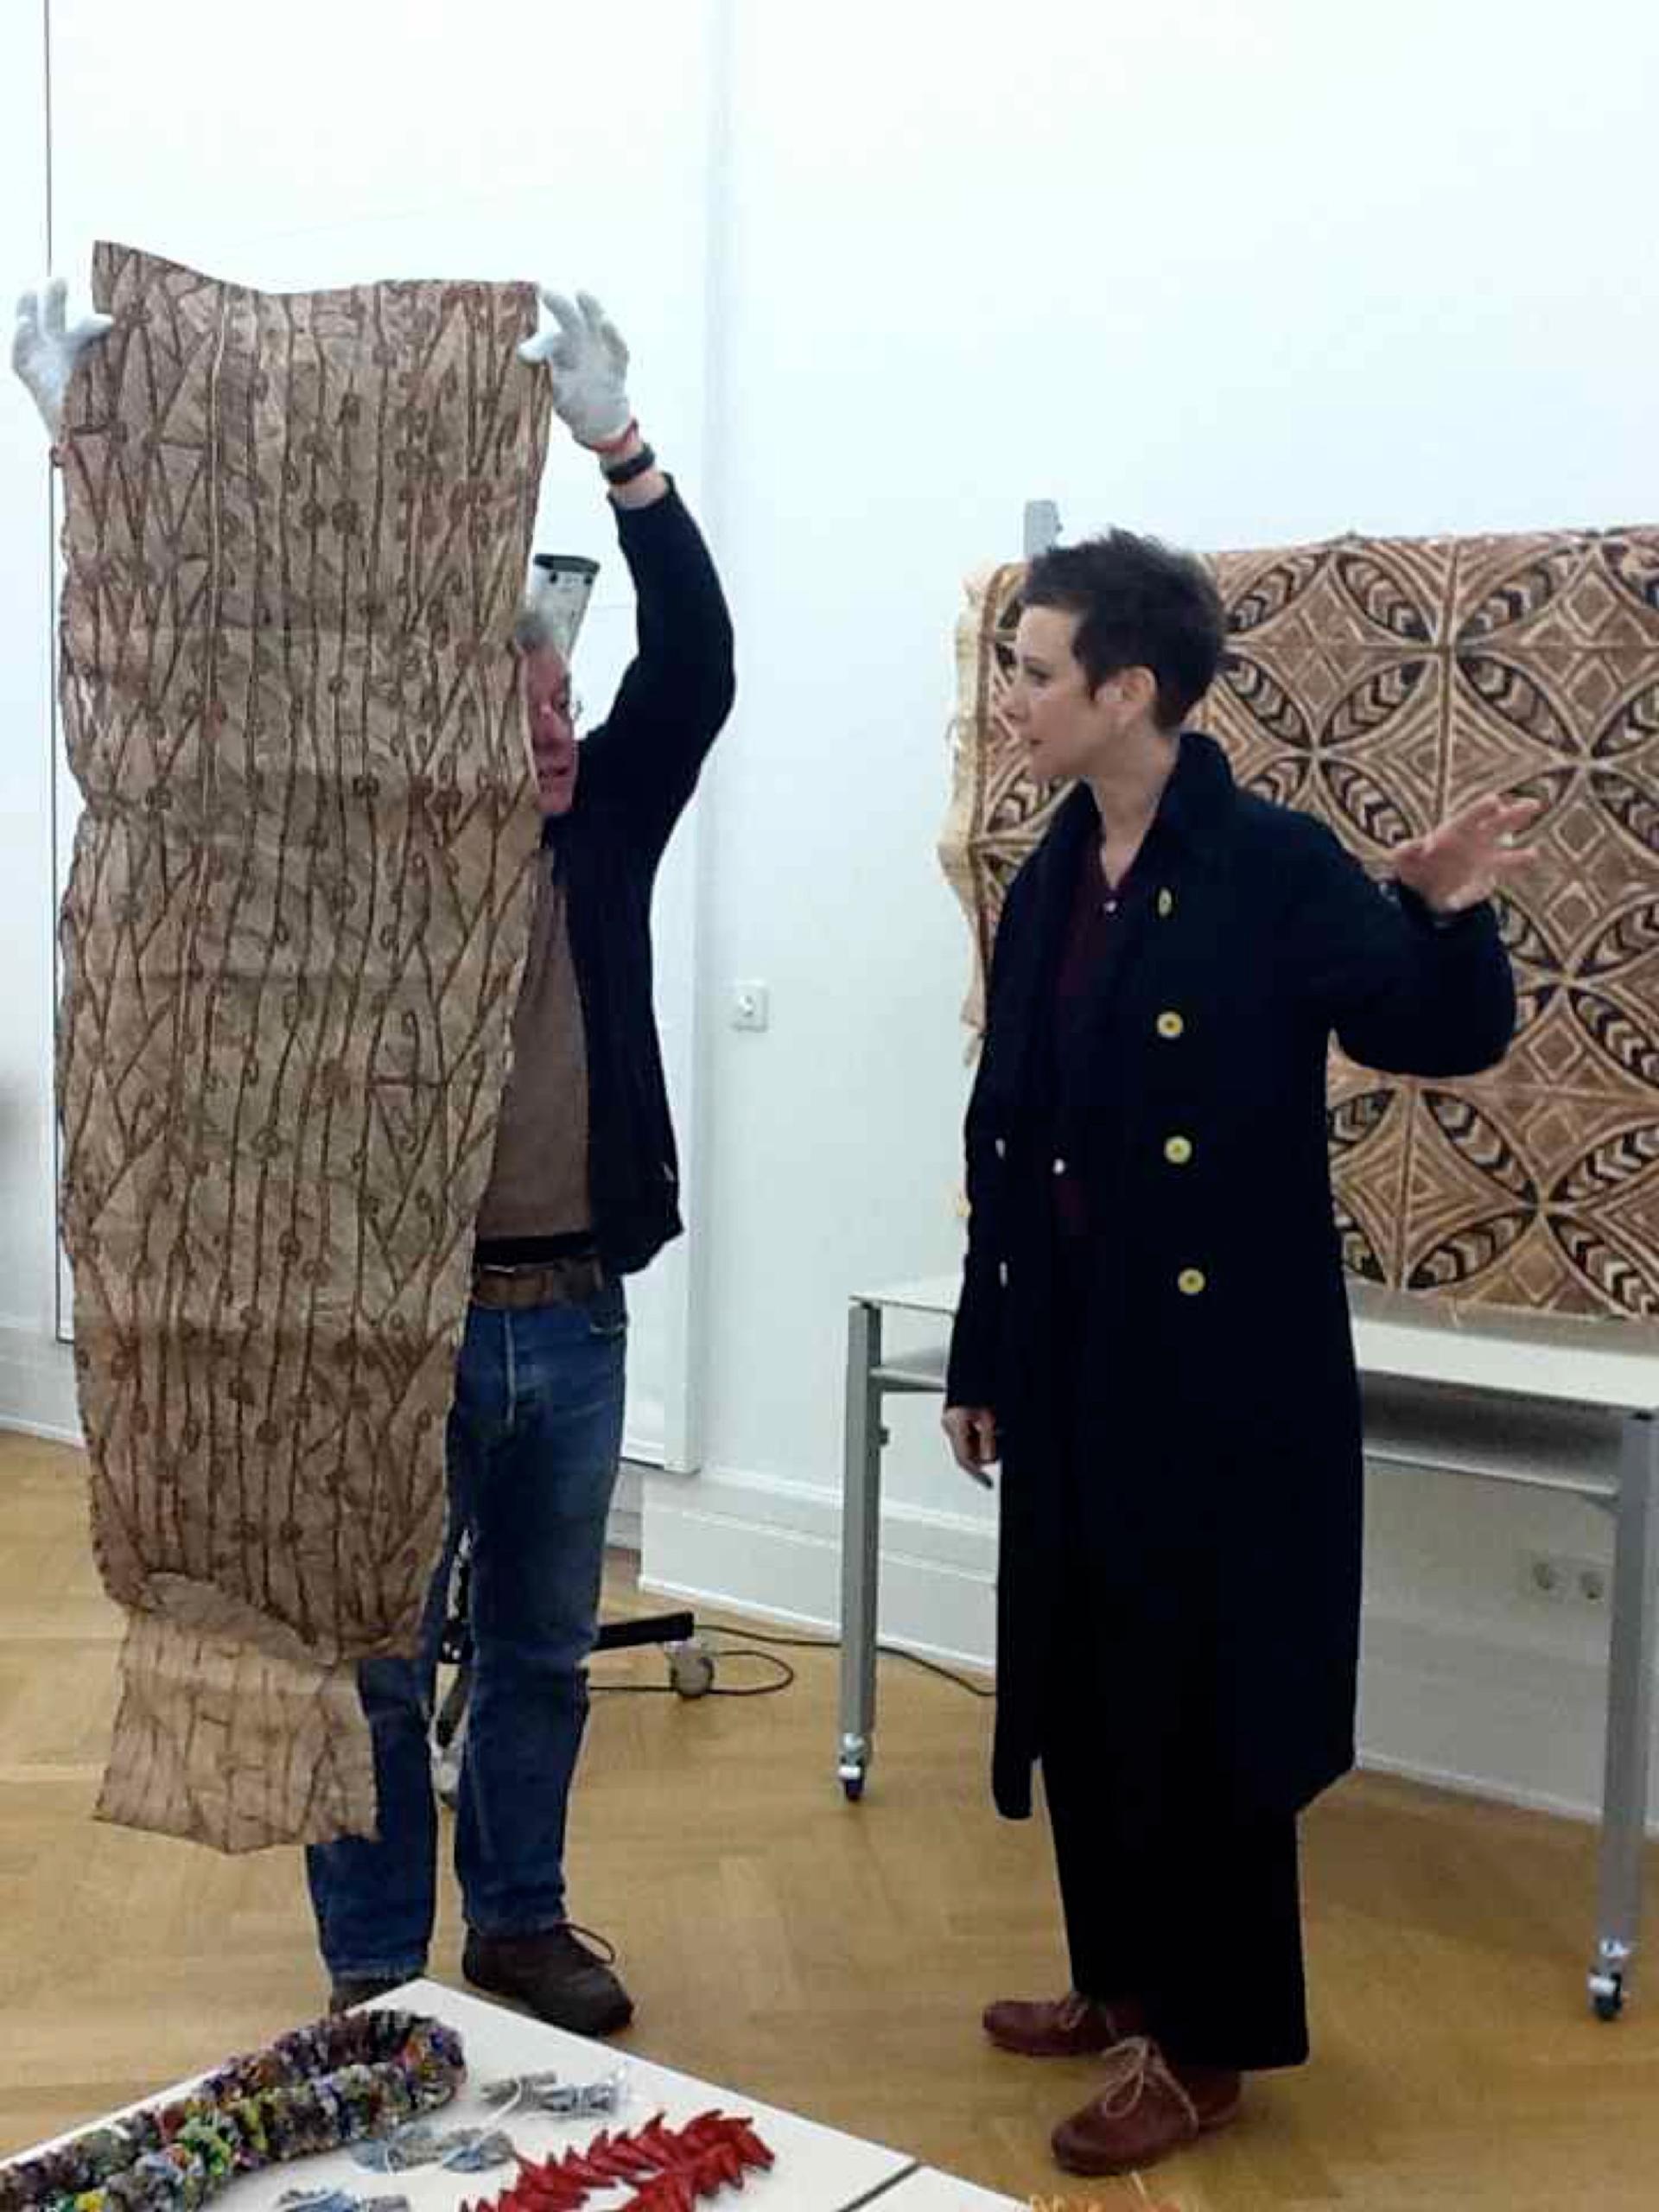 Clémentine Deliss installing Tapa cloth in the lab of the Weltkulturen Museum, 2012, photographer unknown.